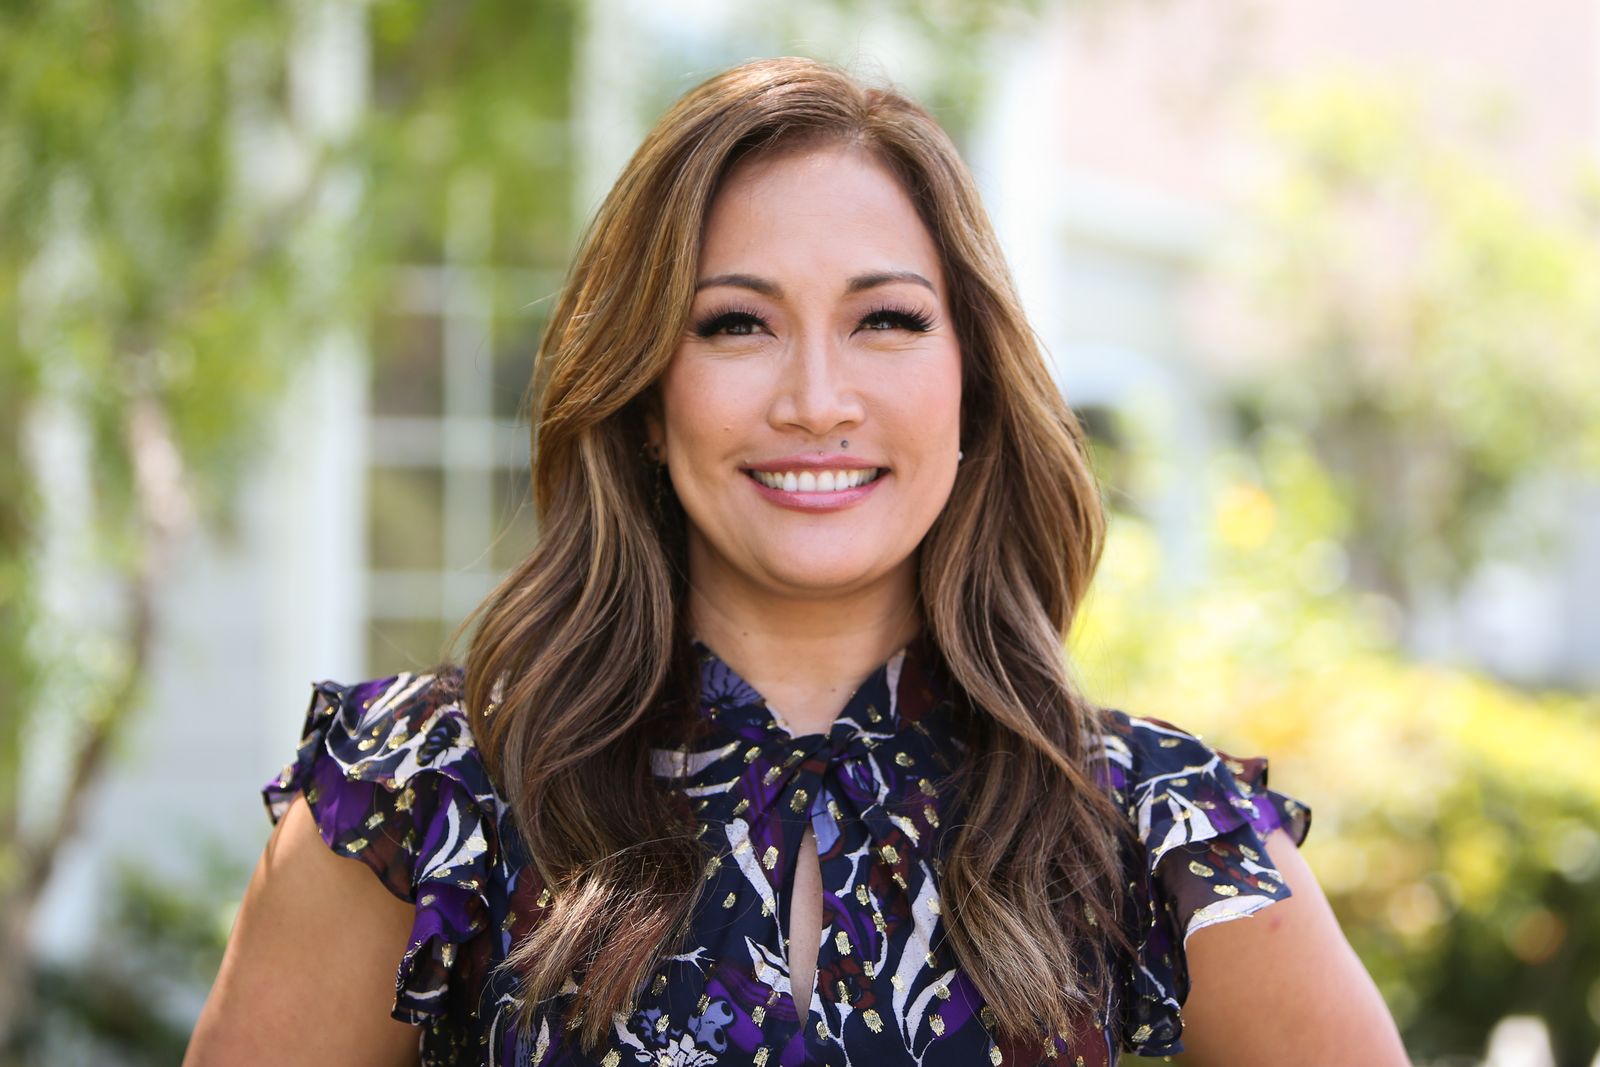 Carrie Ann Inaba visits Hallmark's "Home & Family" at Universal Studios Hollywood on May 3, 2019, in Universal City, California | Photo: Paul Archuleta/Getty Images